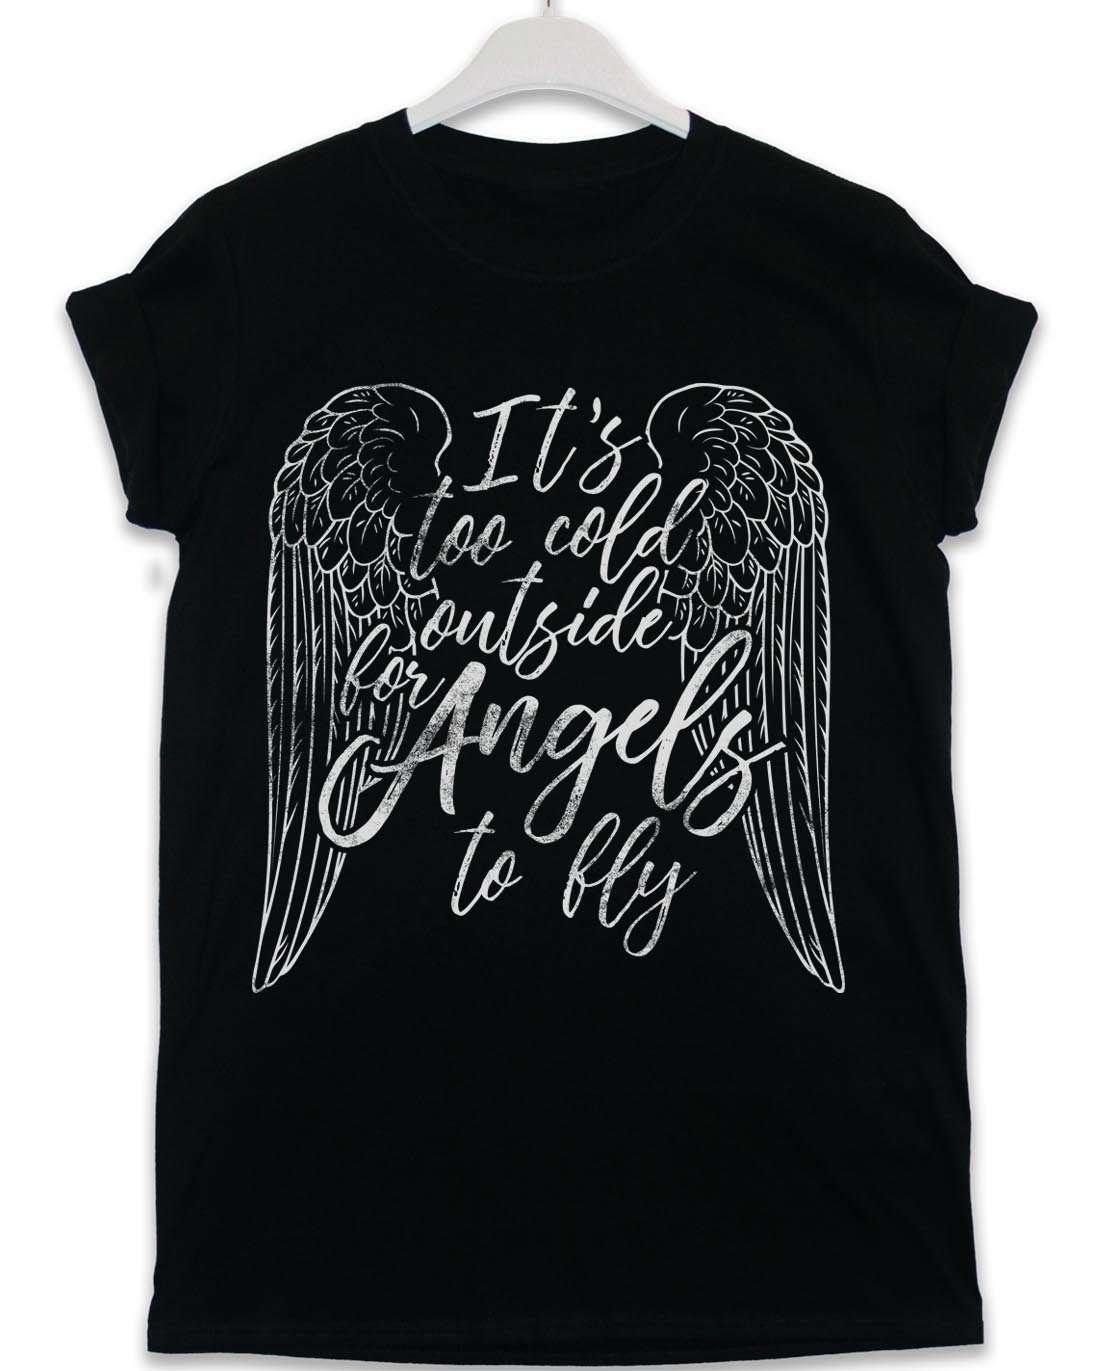 Too Cold for Angels Lyric Quote Mens T-Shirt 8Ball